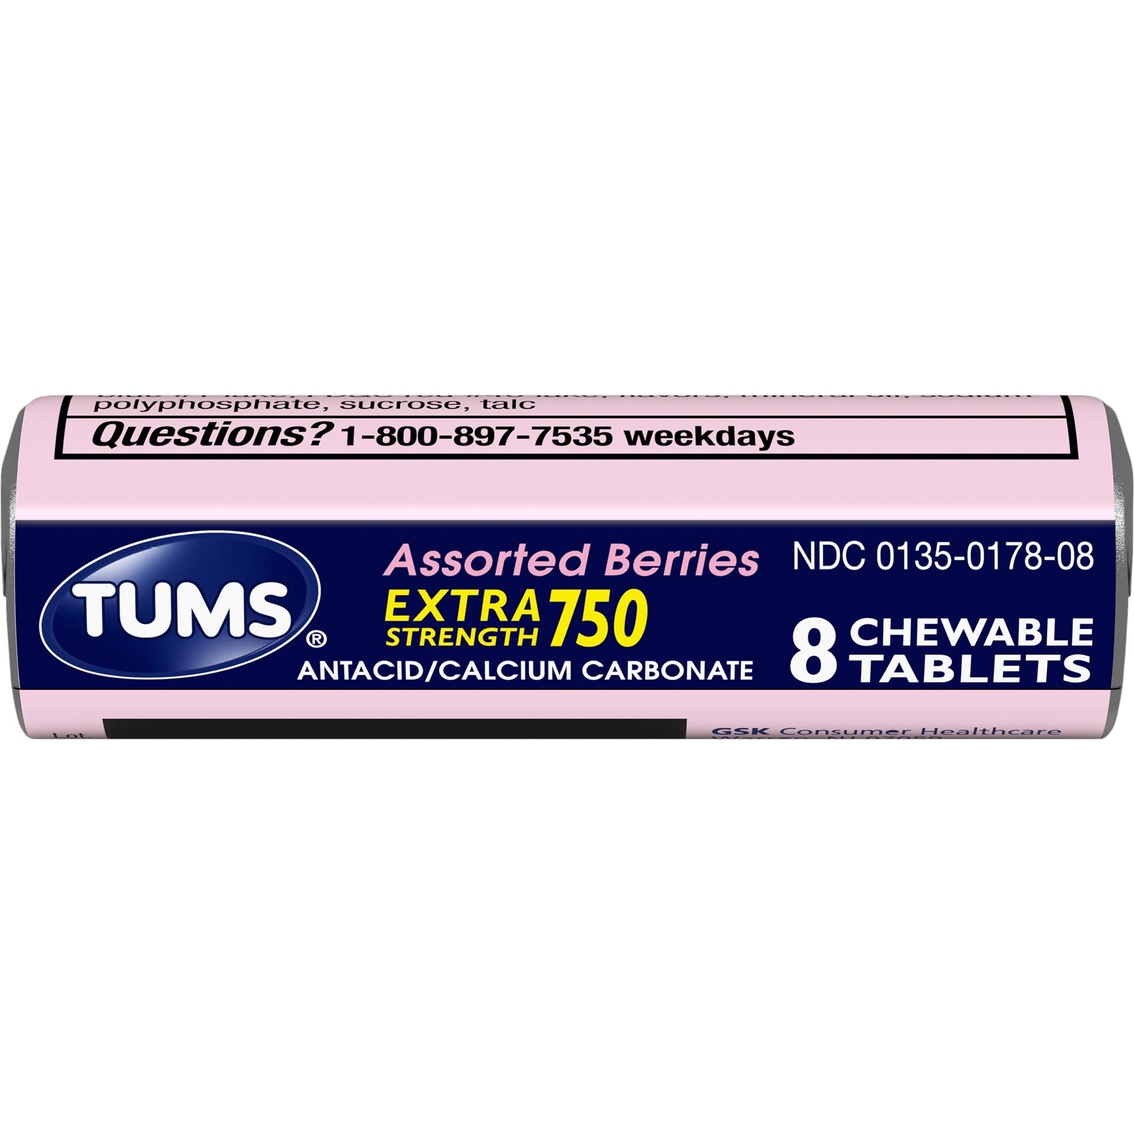 tums extra strength 750 assorted berries chewable tablets